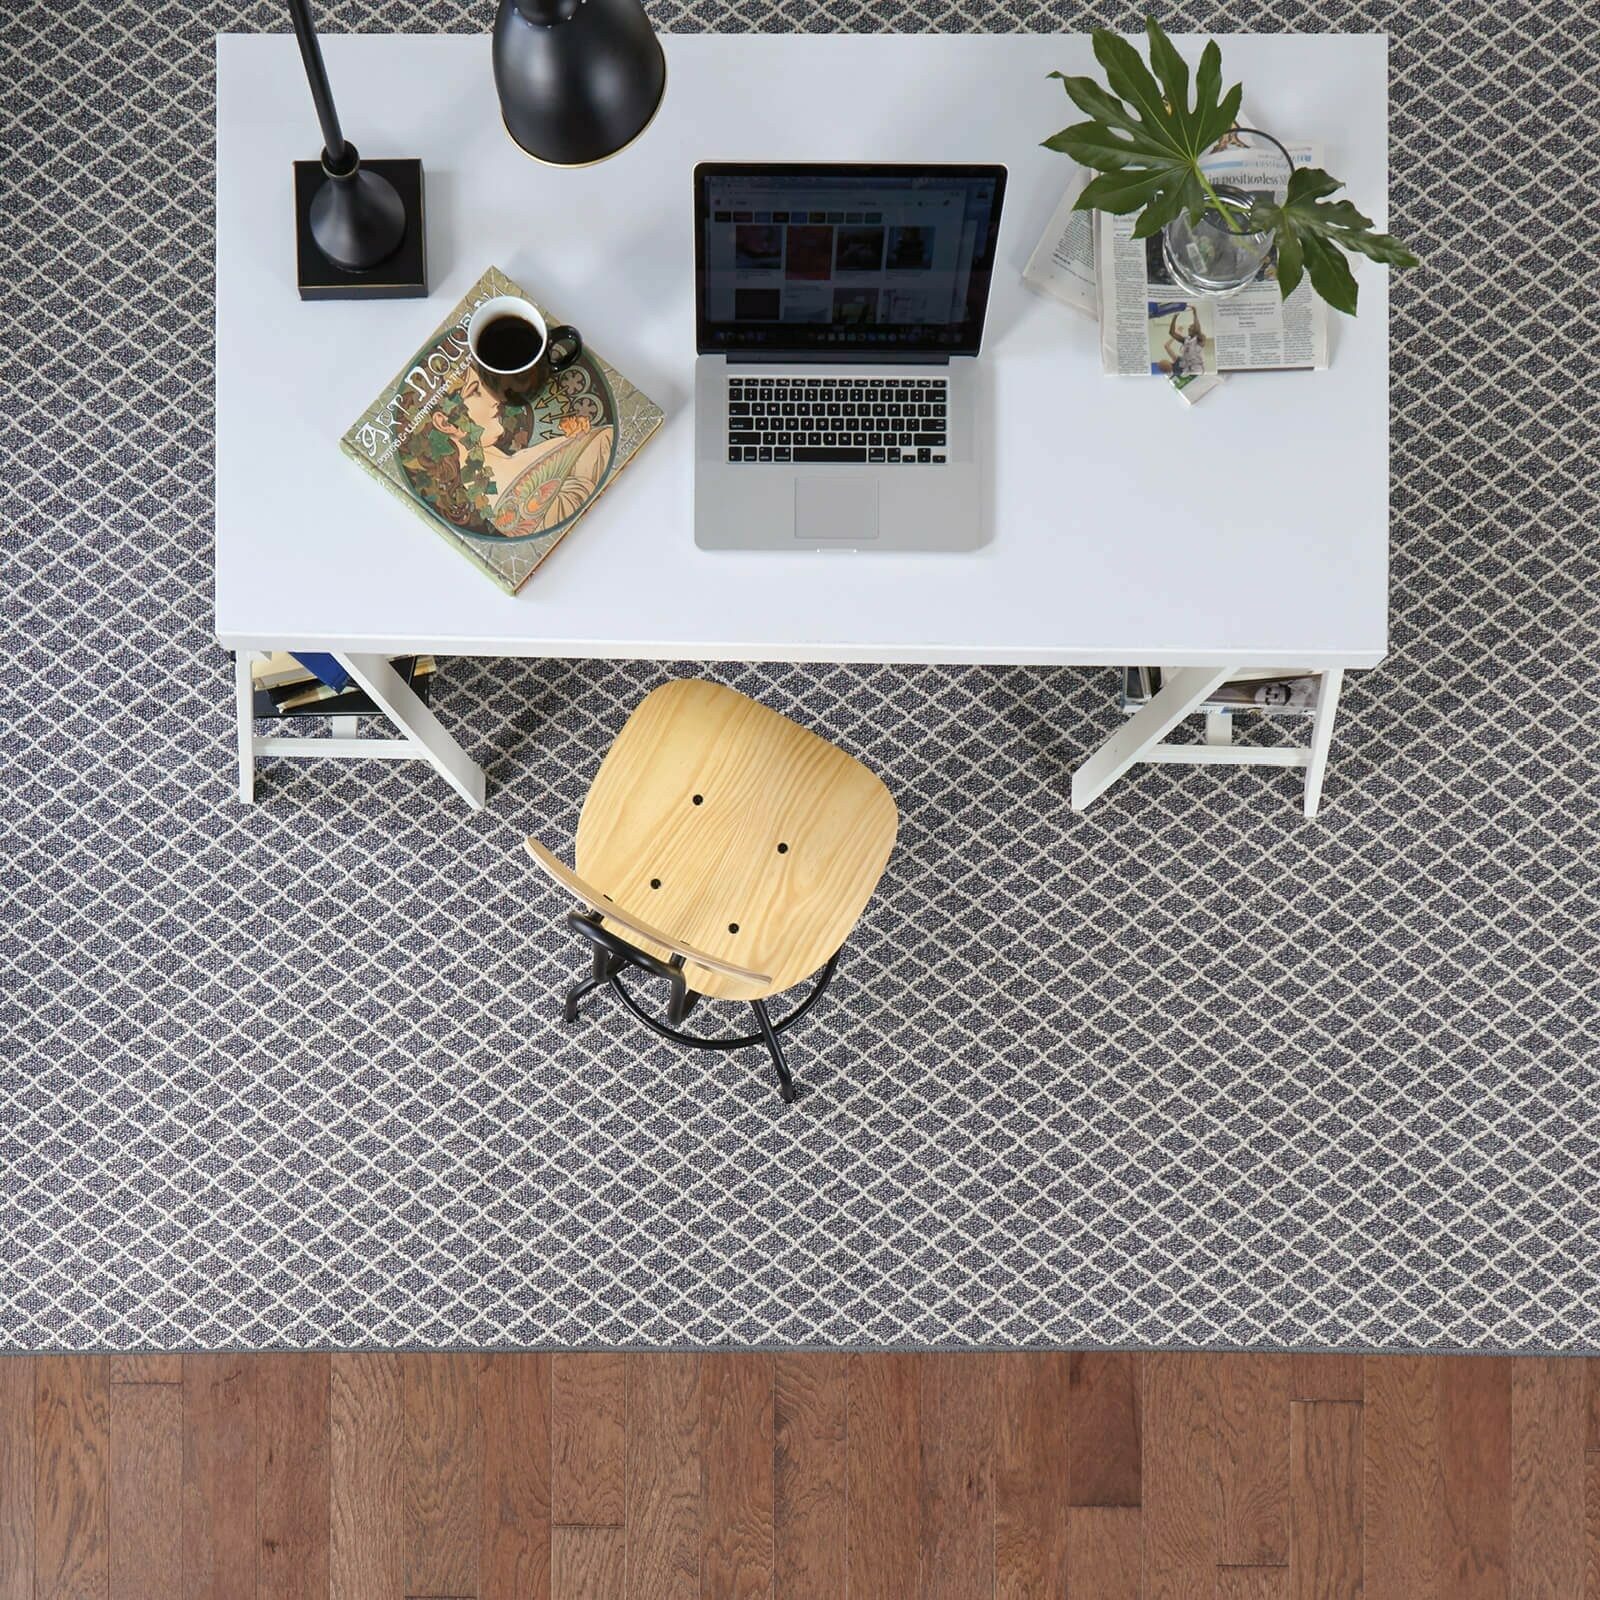 Area rug for a home office | Flooring 101